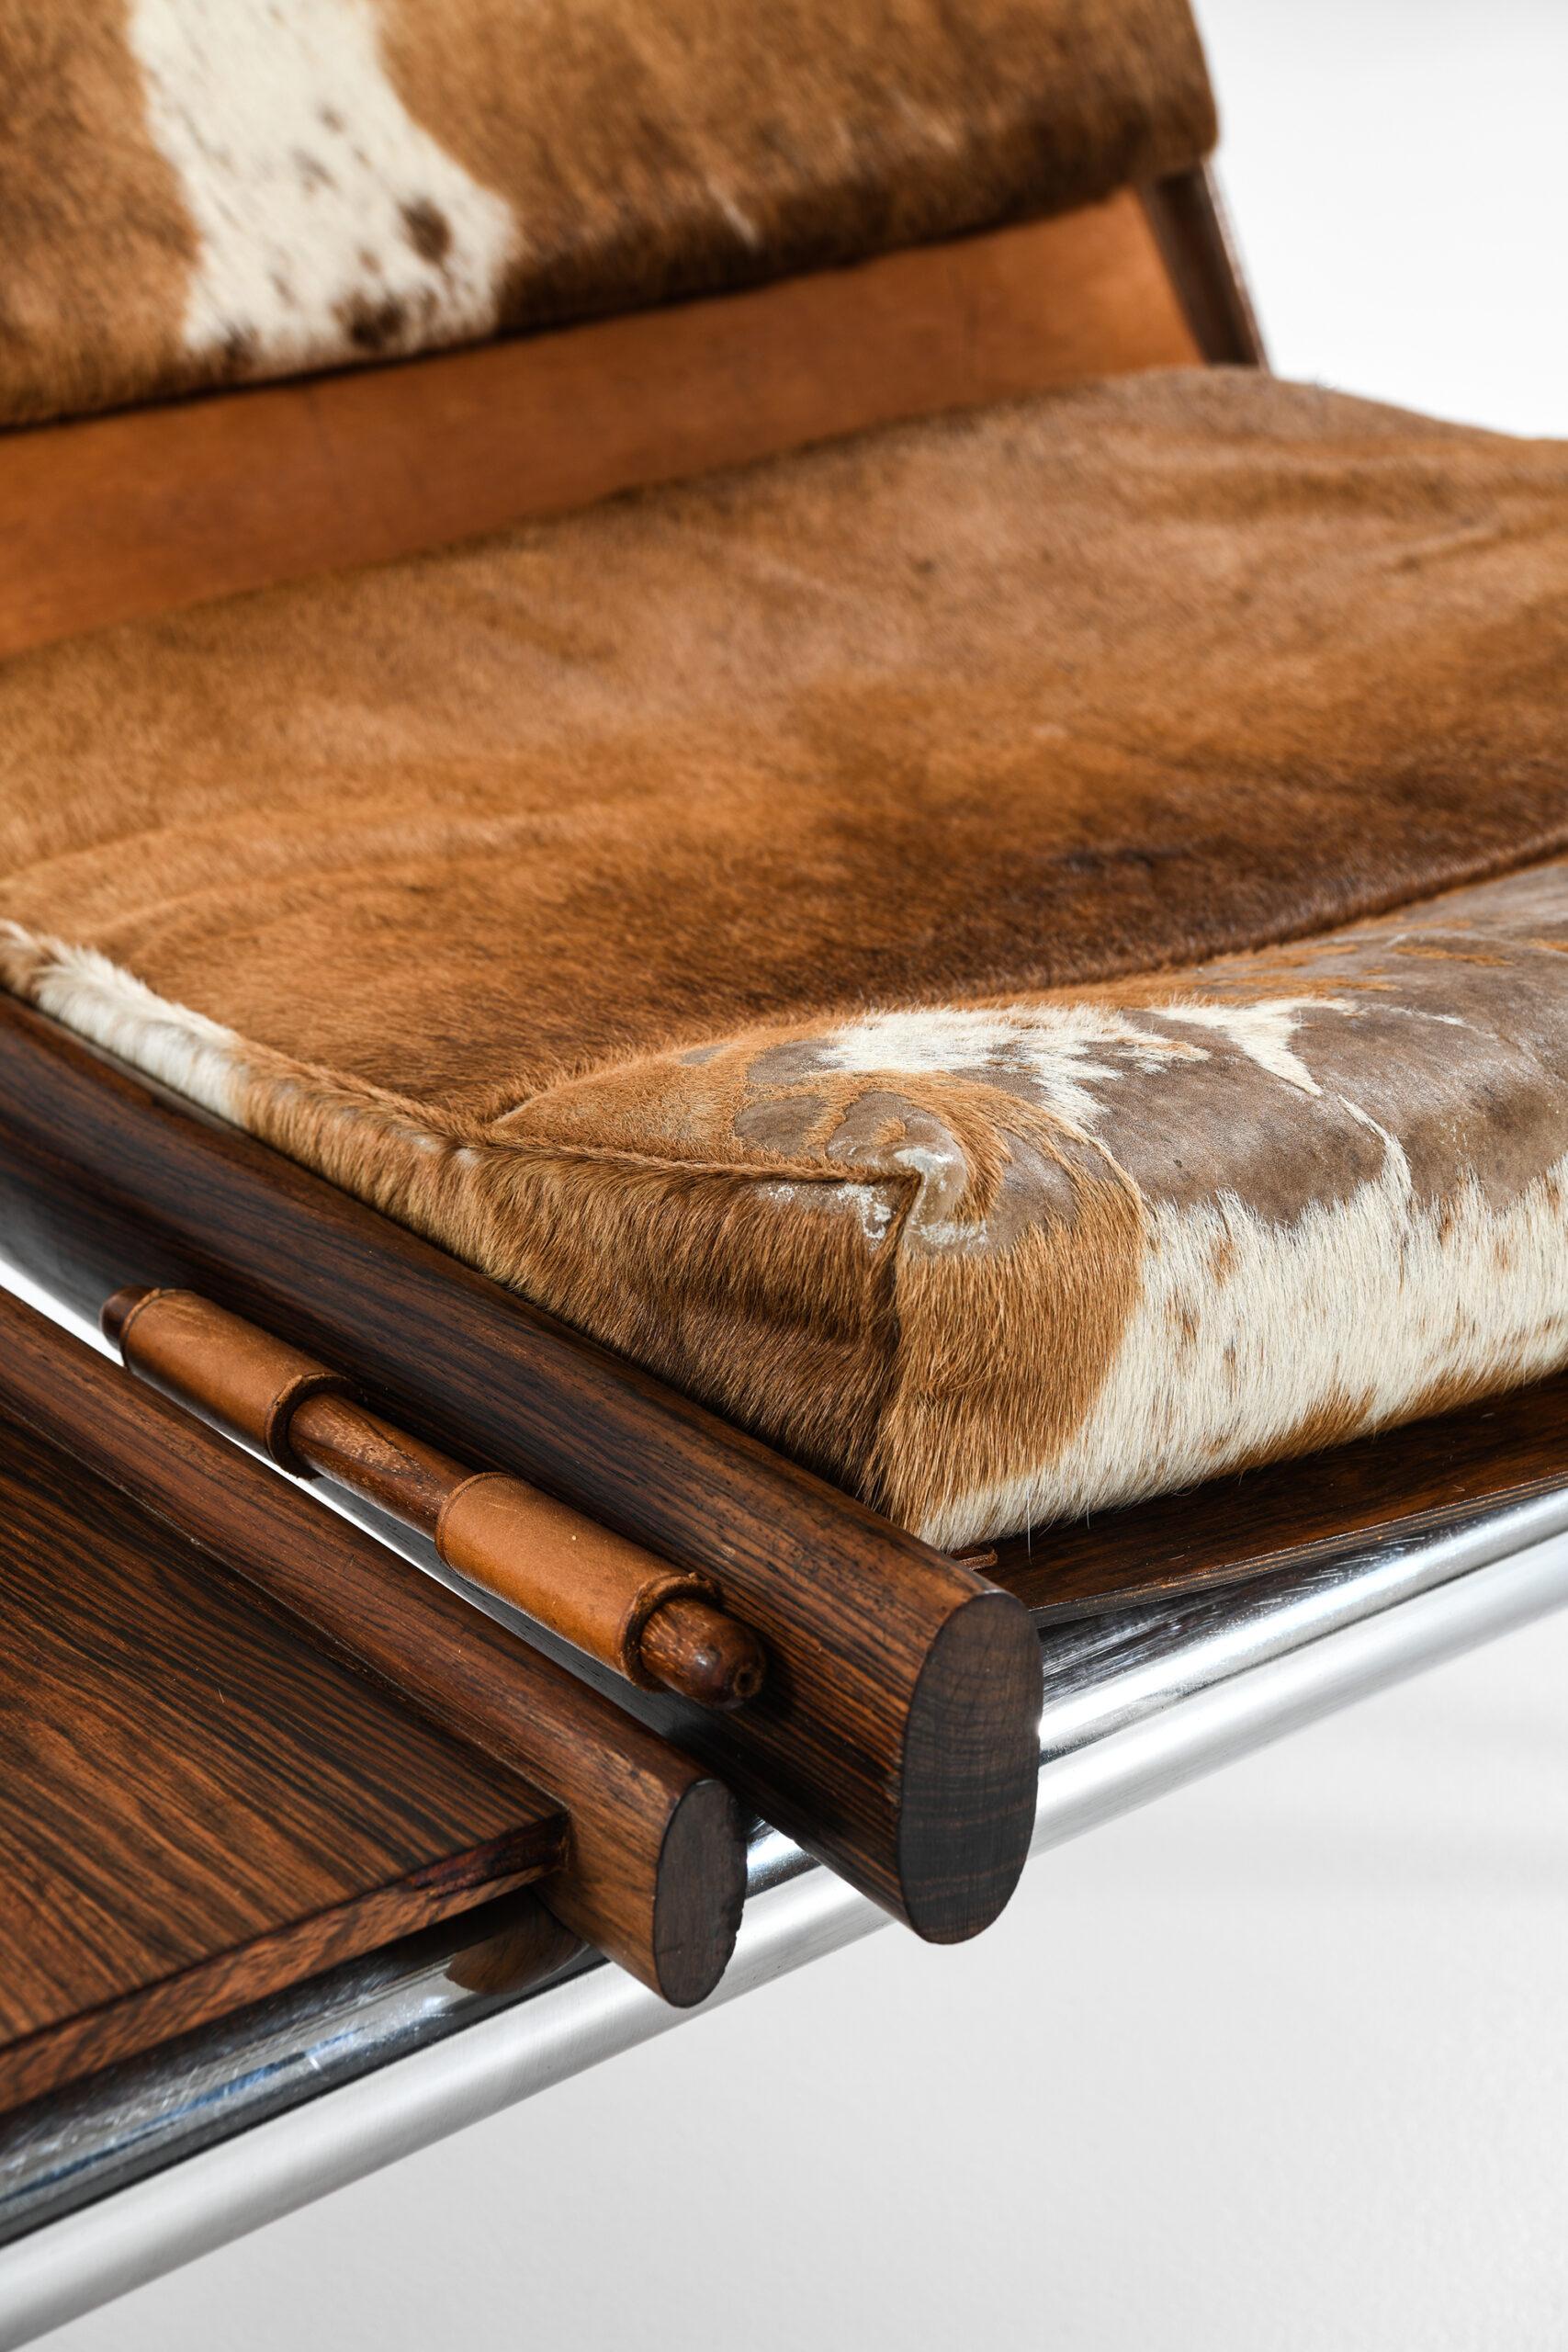 Cowhide Percival Lafer Bench Produced by Lafer MP in Brazil